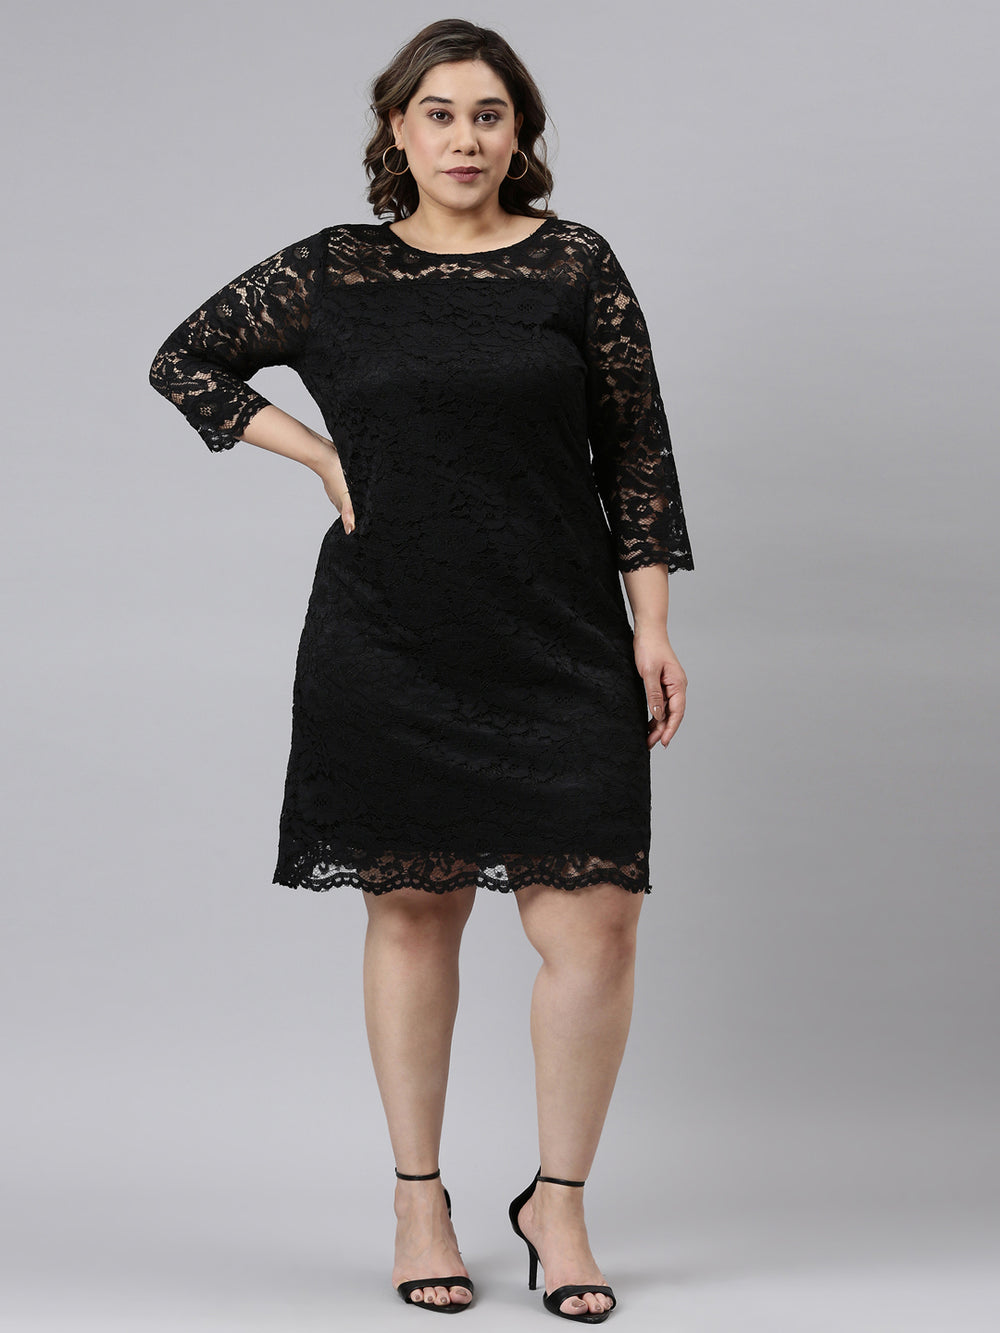 Plus Size Party Wear Western Dresses Online – The Pink Moon